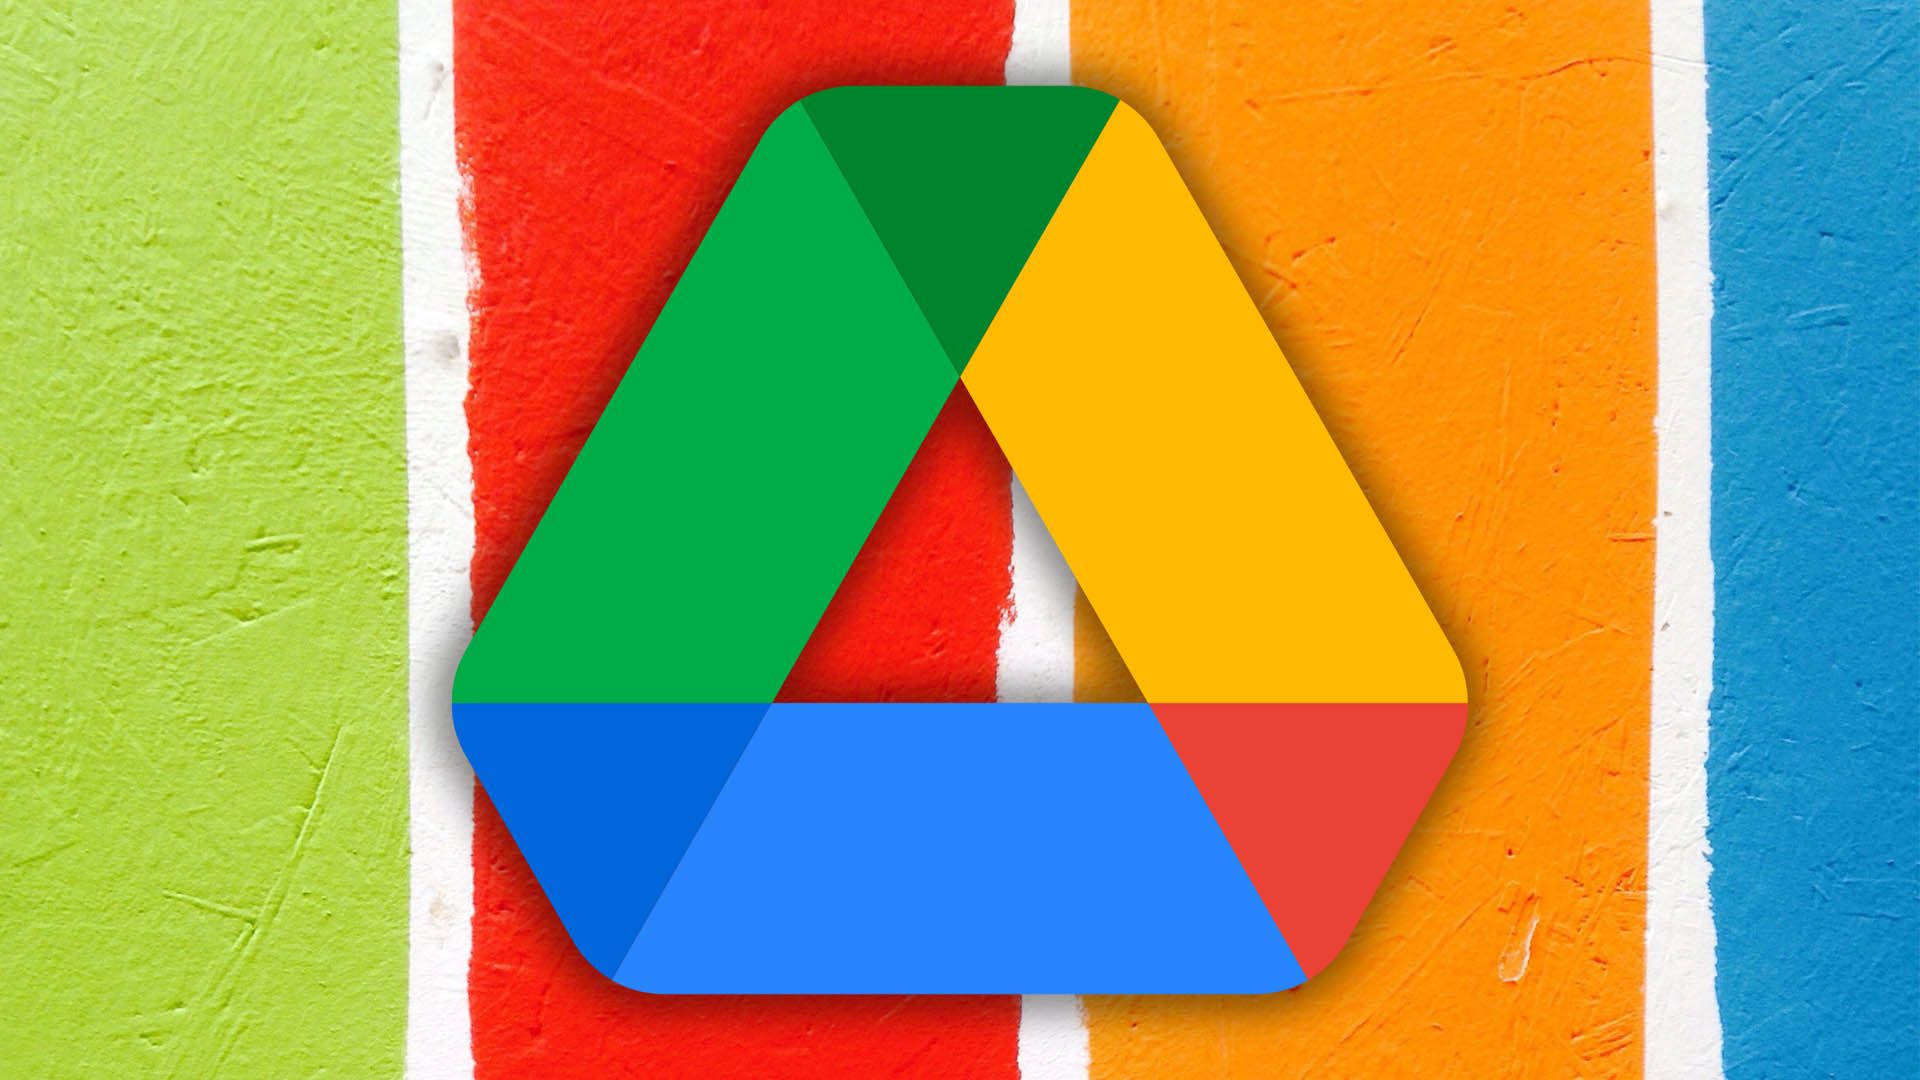 Google Drive has a new widget to adorn your tablet’s home screen